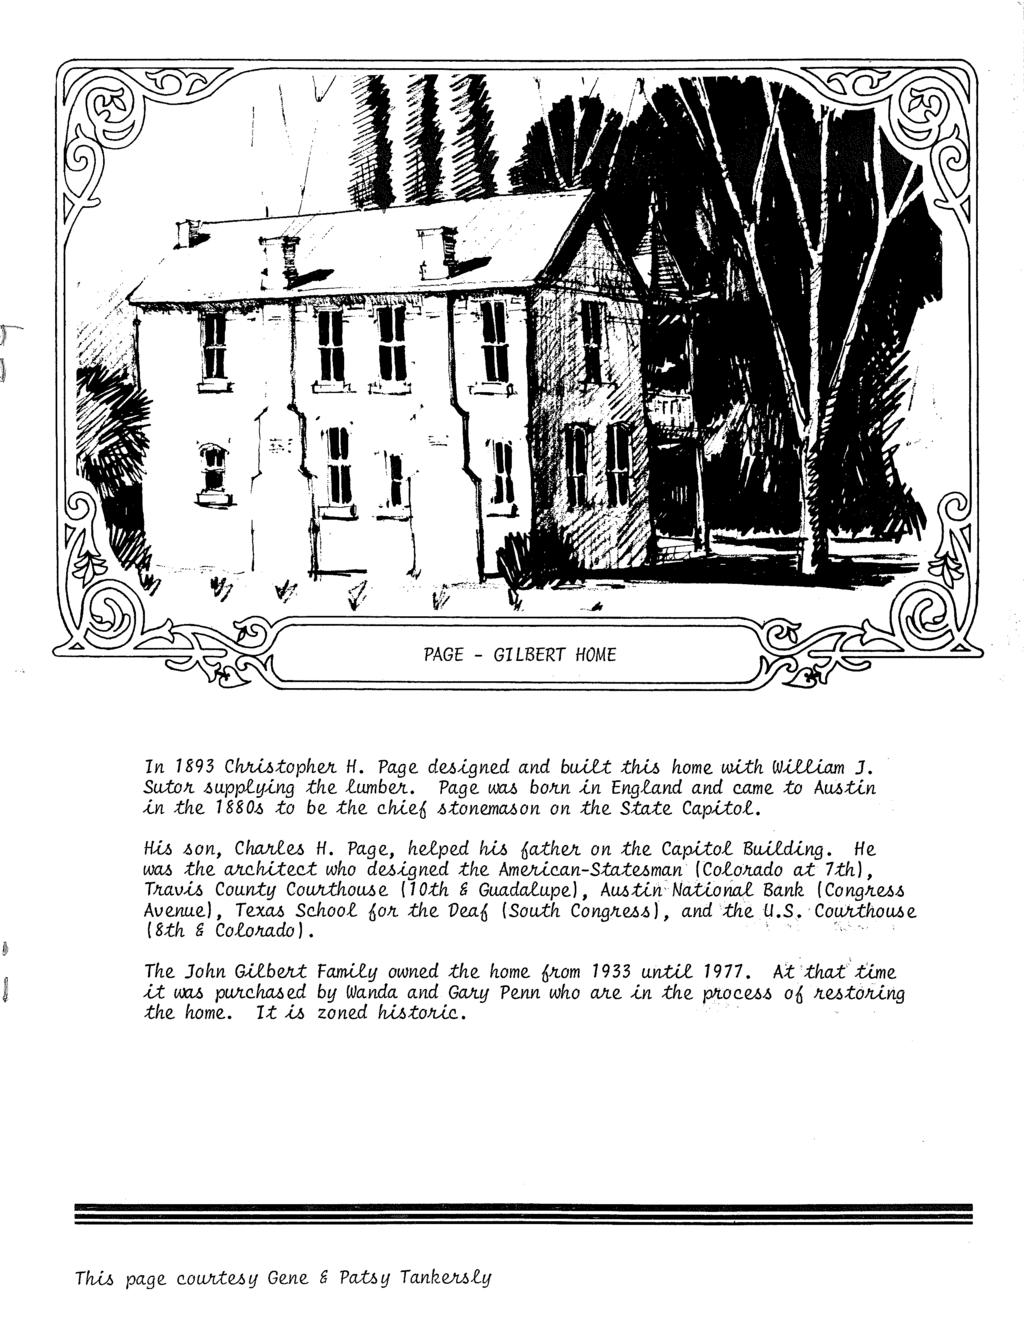 ,:"f ~r PAGE - GILBERT HOME In 1893 C~toph~ H. Page d~~gned and built t~ home with W~ J. Su:toJr..6uppiy~ng the iu.mb~. Page WCL6 bojr.n ~n England and c.a.me to AU.6.:Un ~n the 1880.6 to be the c.h<.